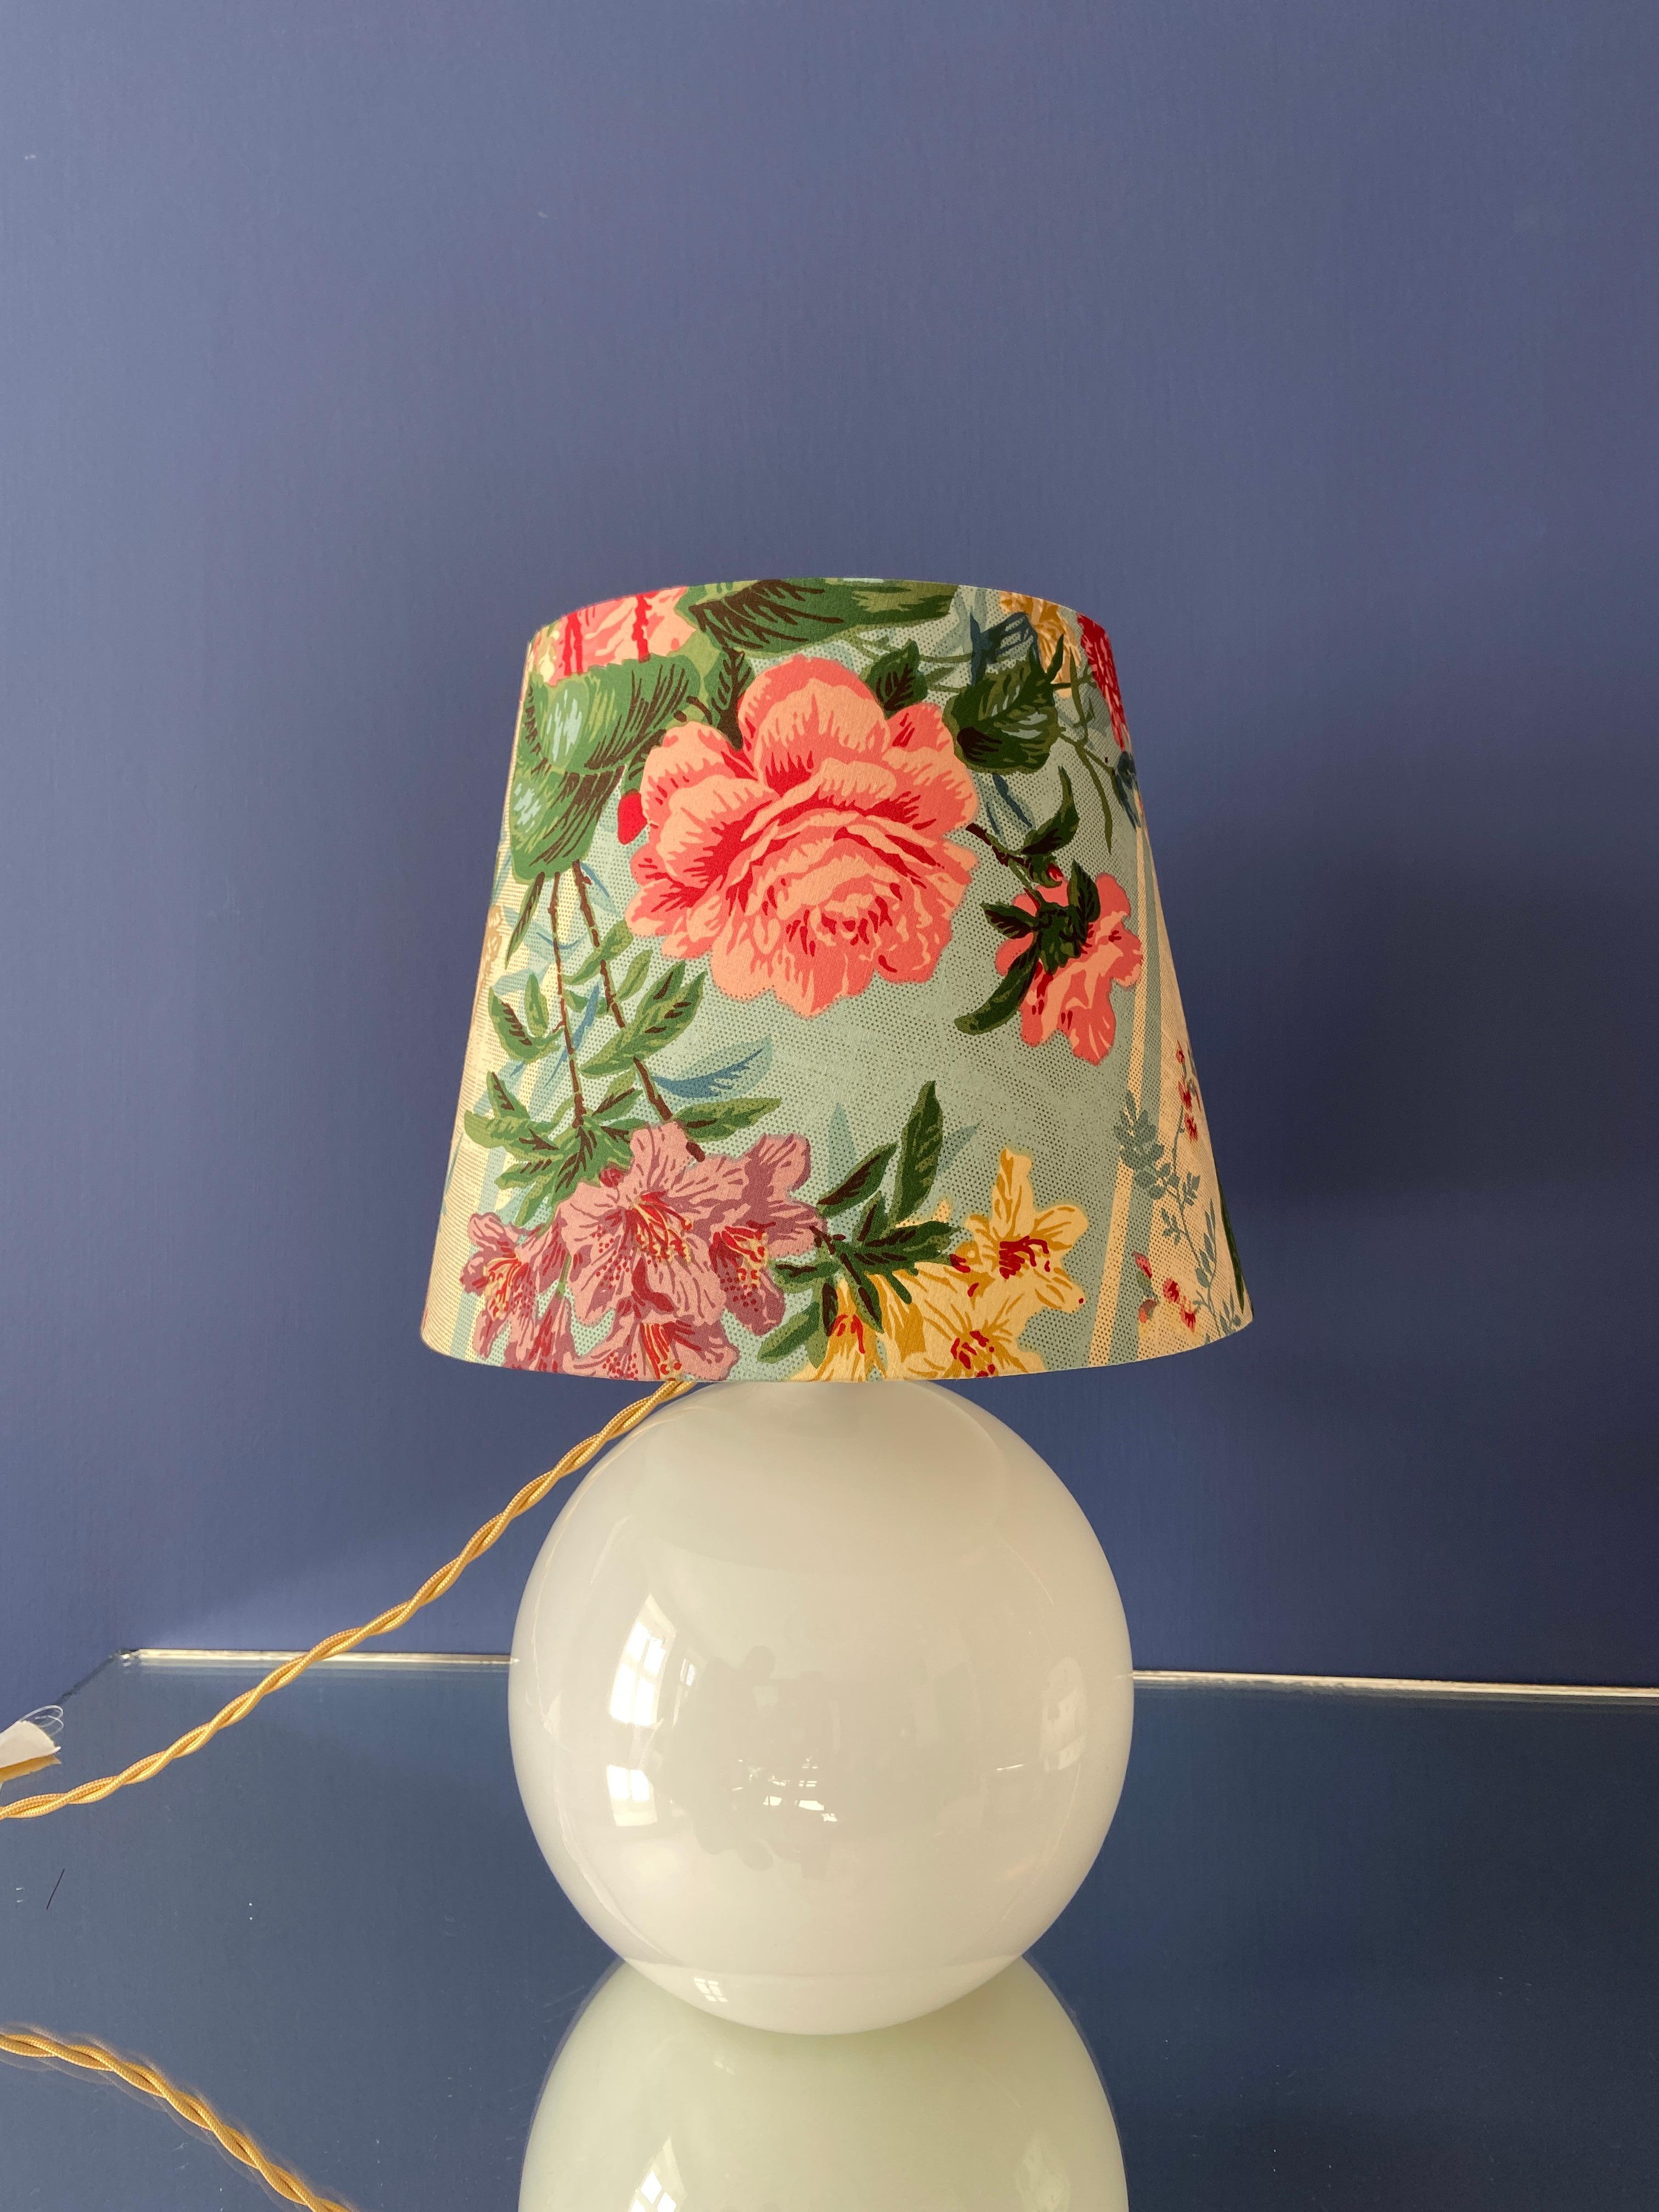 French Vintage Opaline Table Lamp with Customized Shade by the Apartment, France 1930s